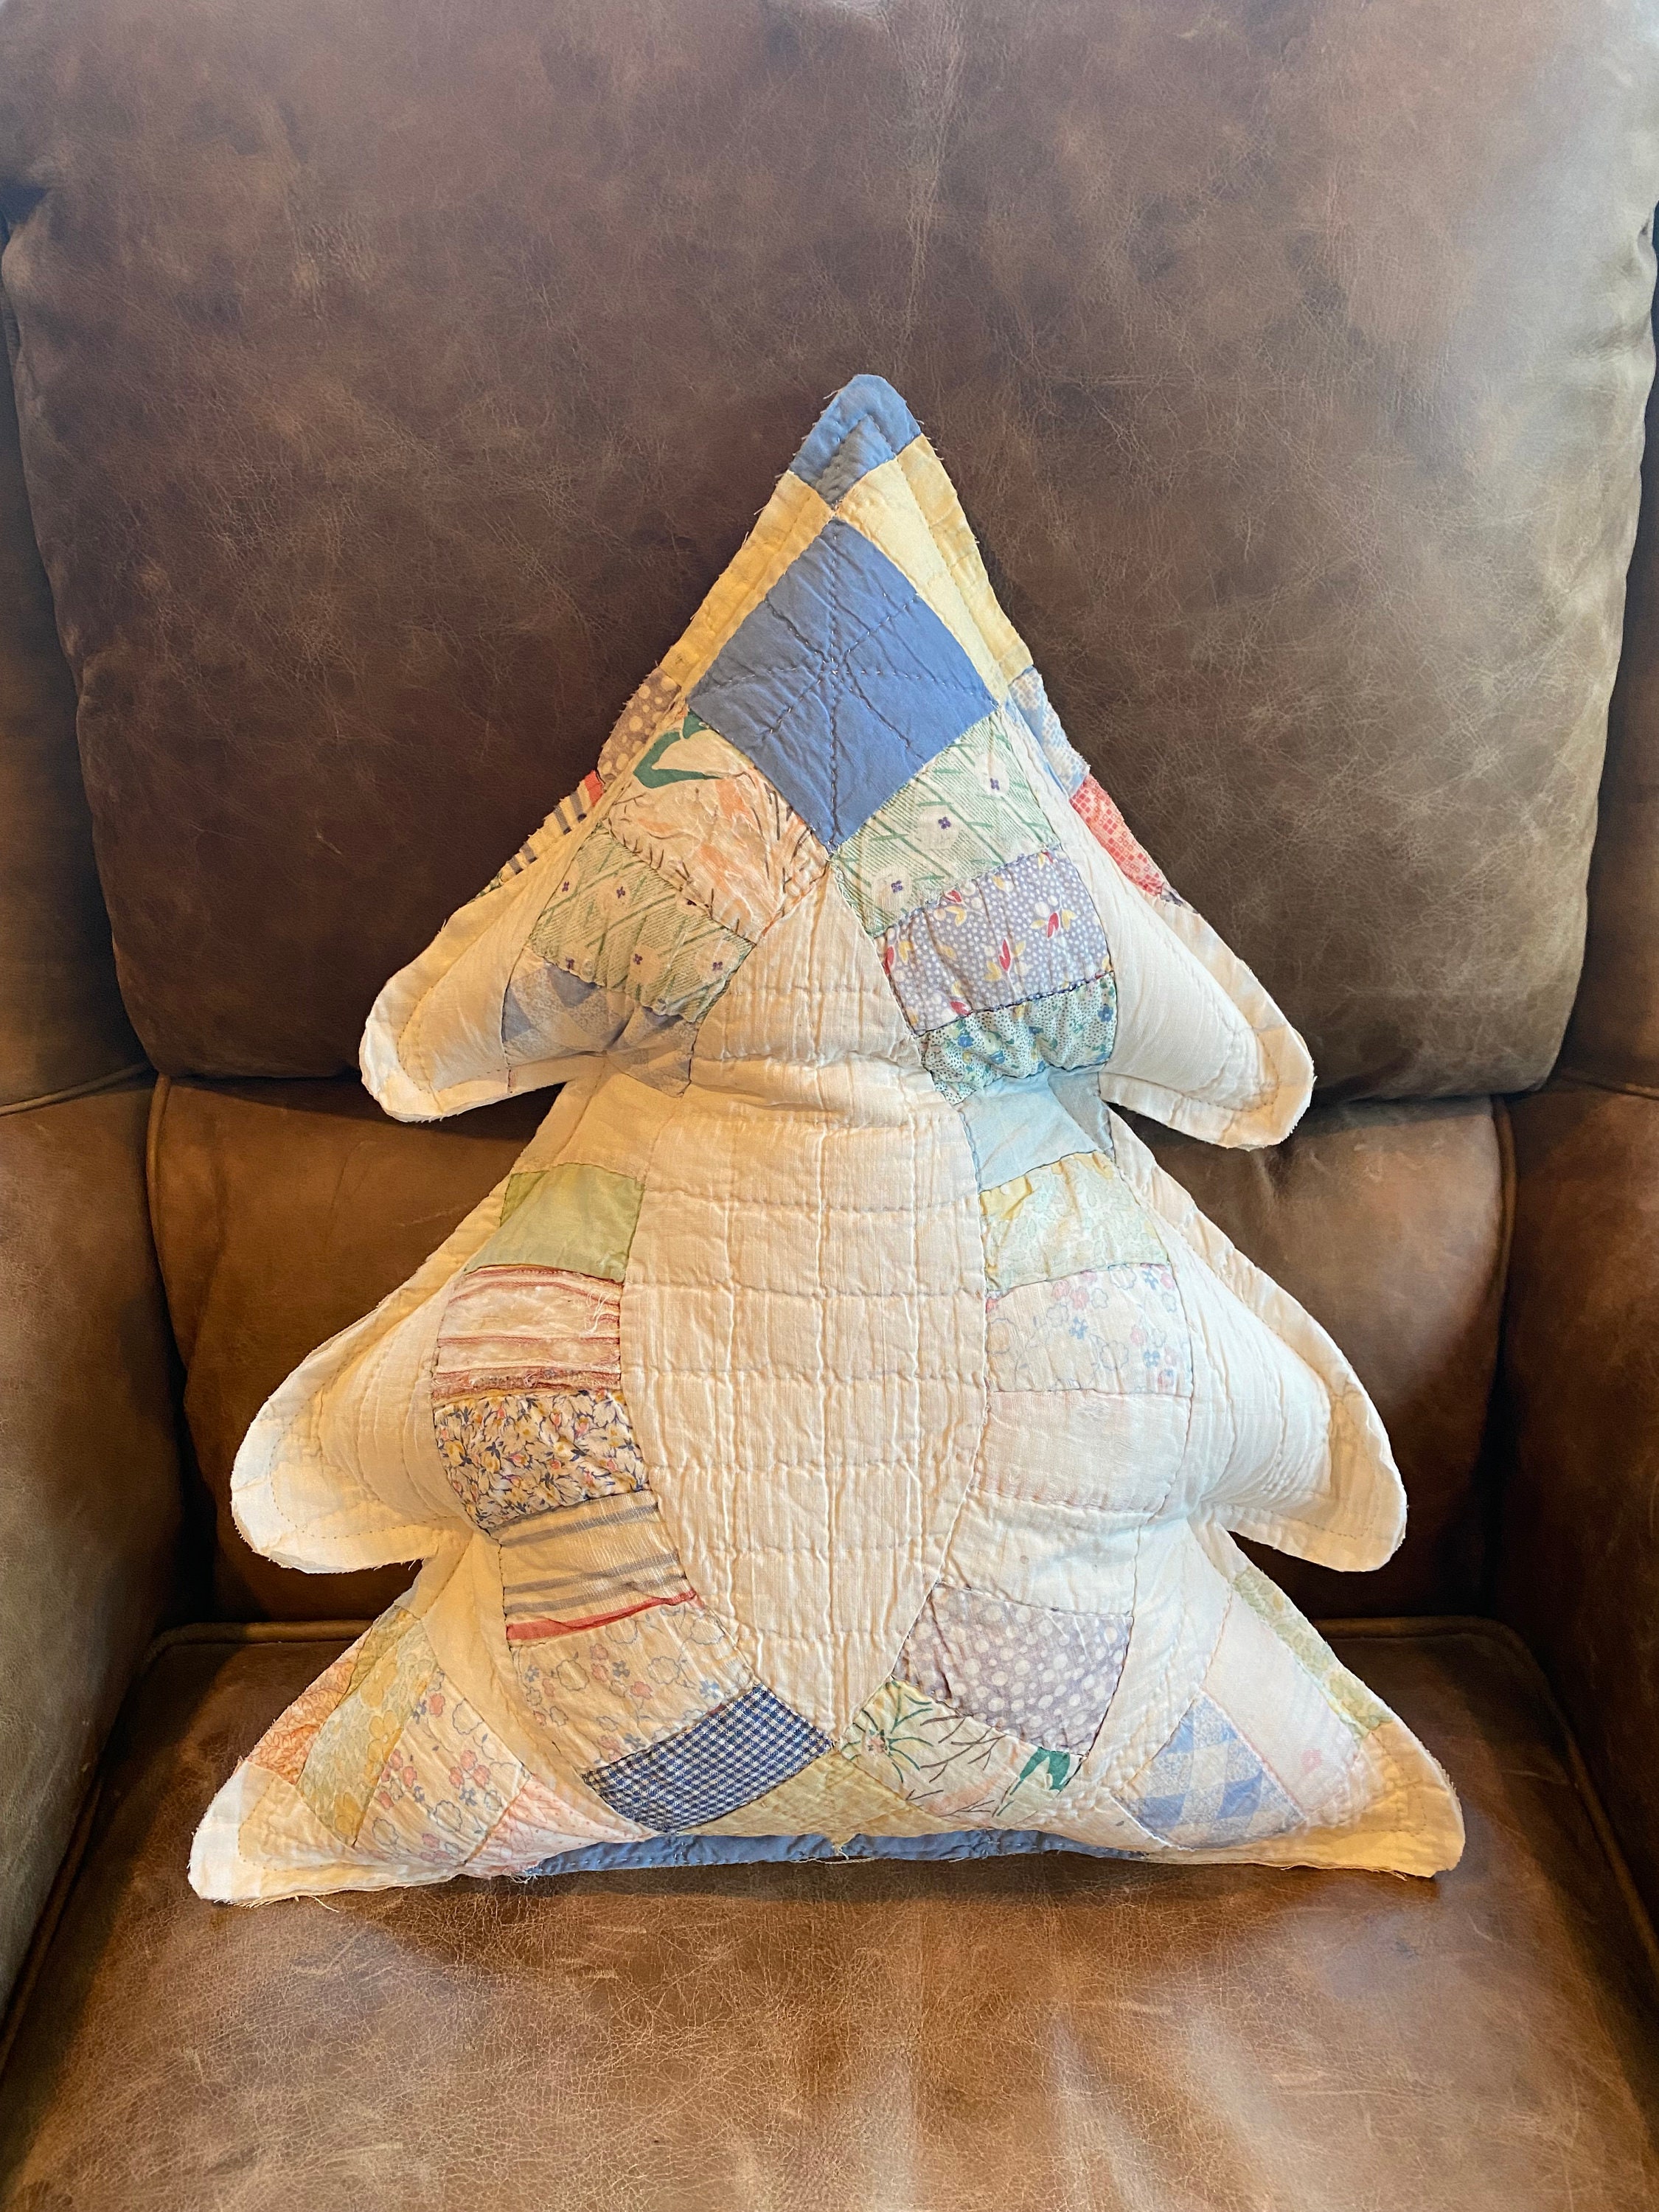 Quilted Christmas Pillows - A Quilting Life